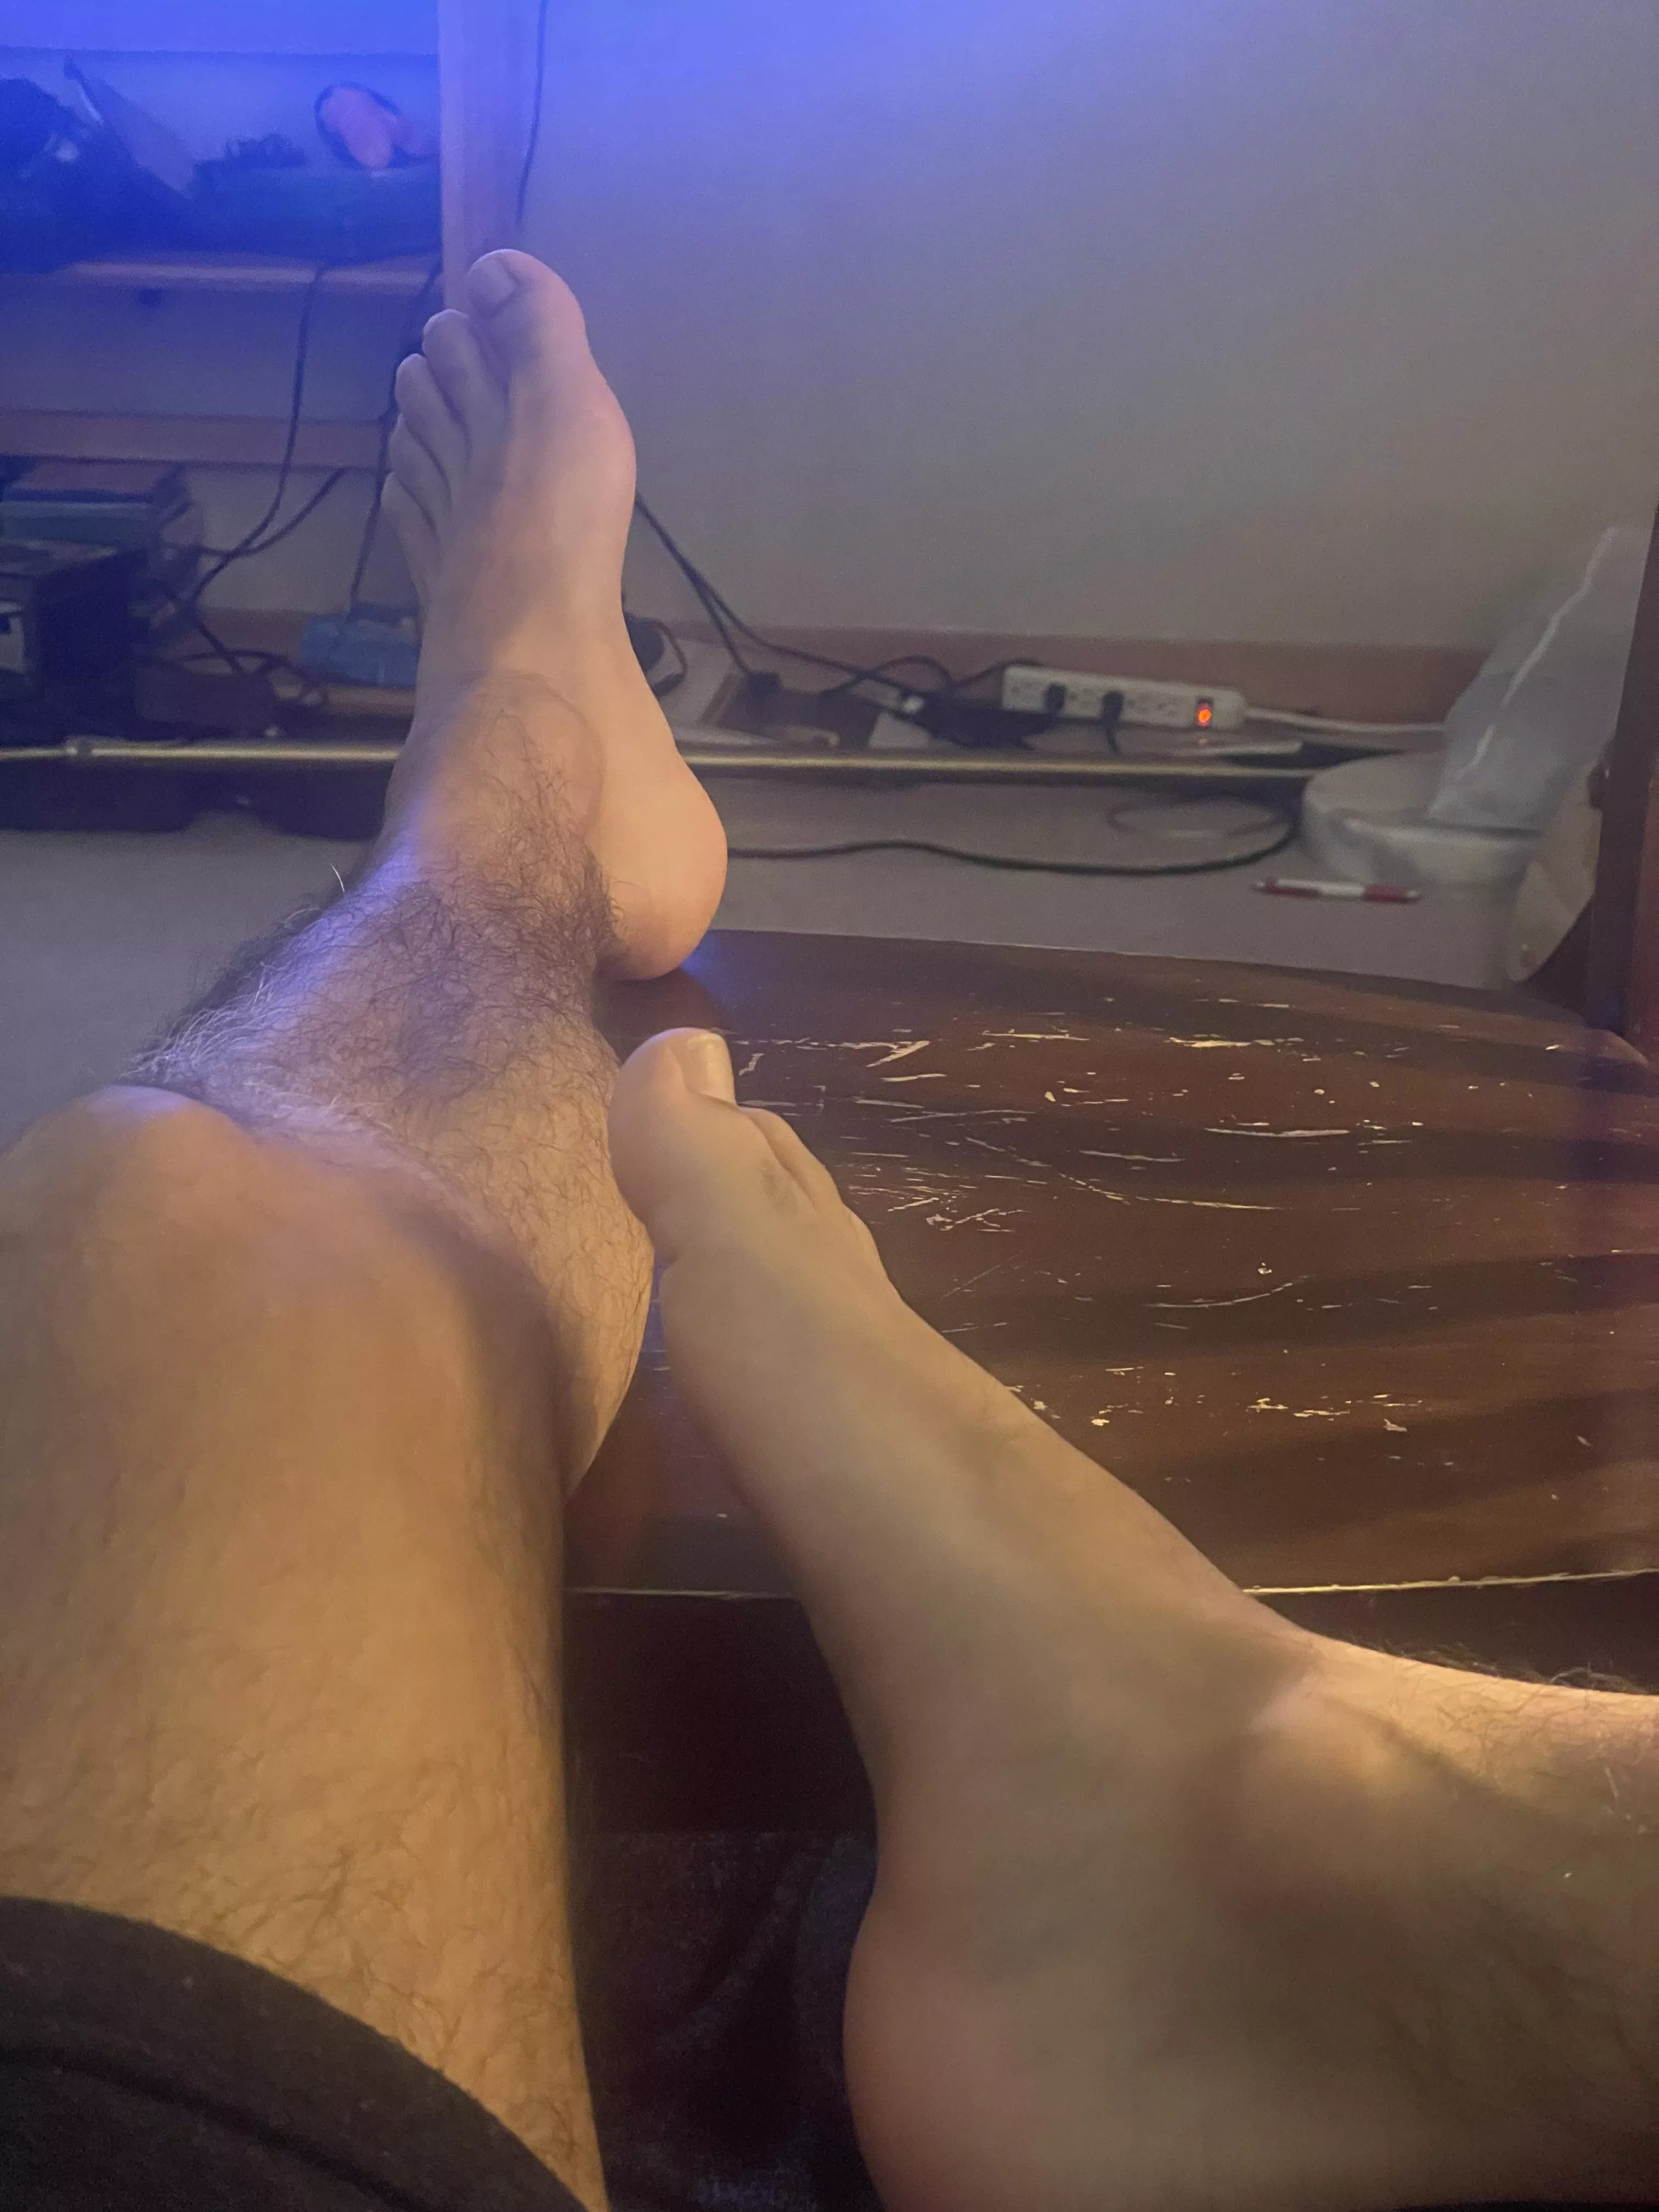 Arches Toes And Legs Nudes Gayfootfetish Nude Pics Org